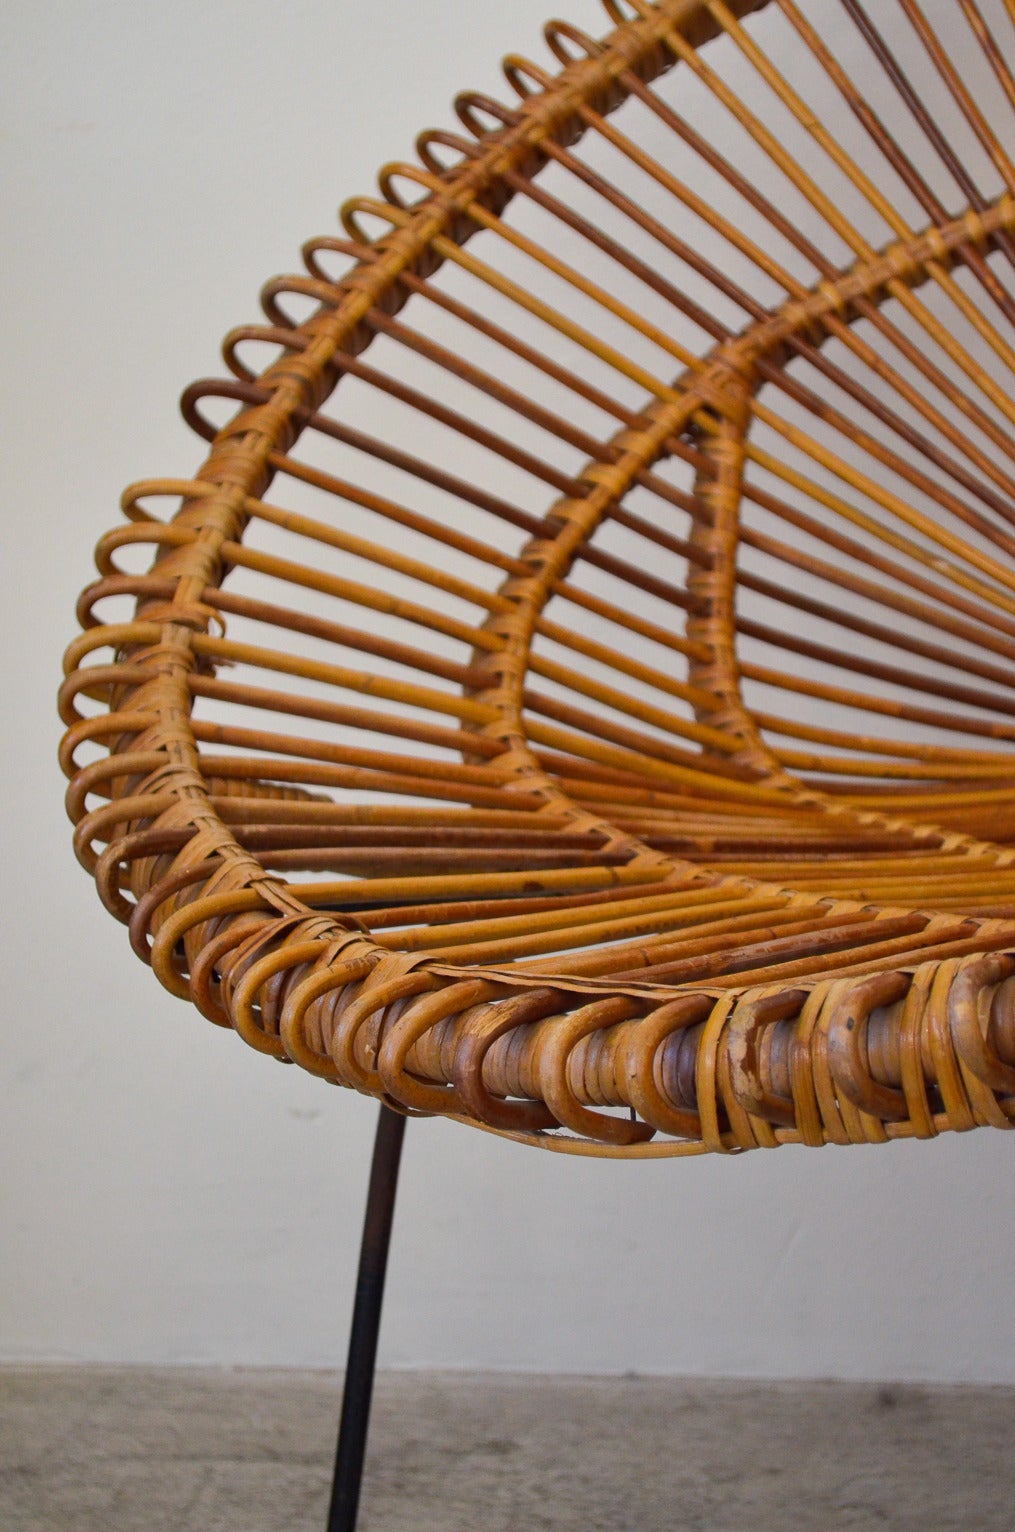 Mid-Century Modern Rattan and Iron Hoop Chair Attributed to Janine Abraham and Dirk Jan Rol